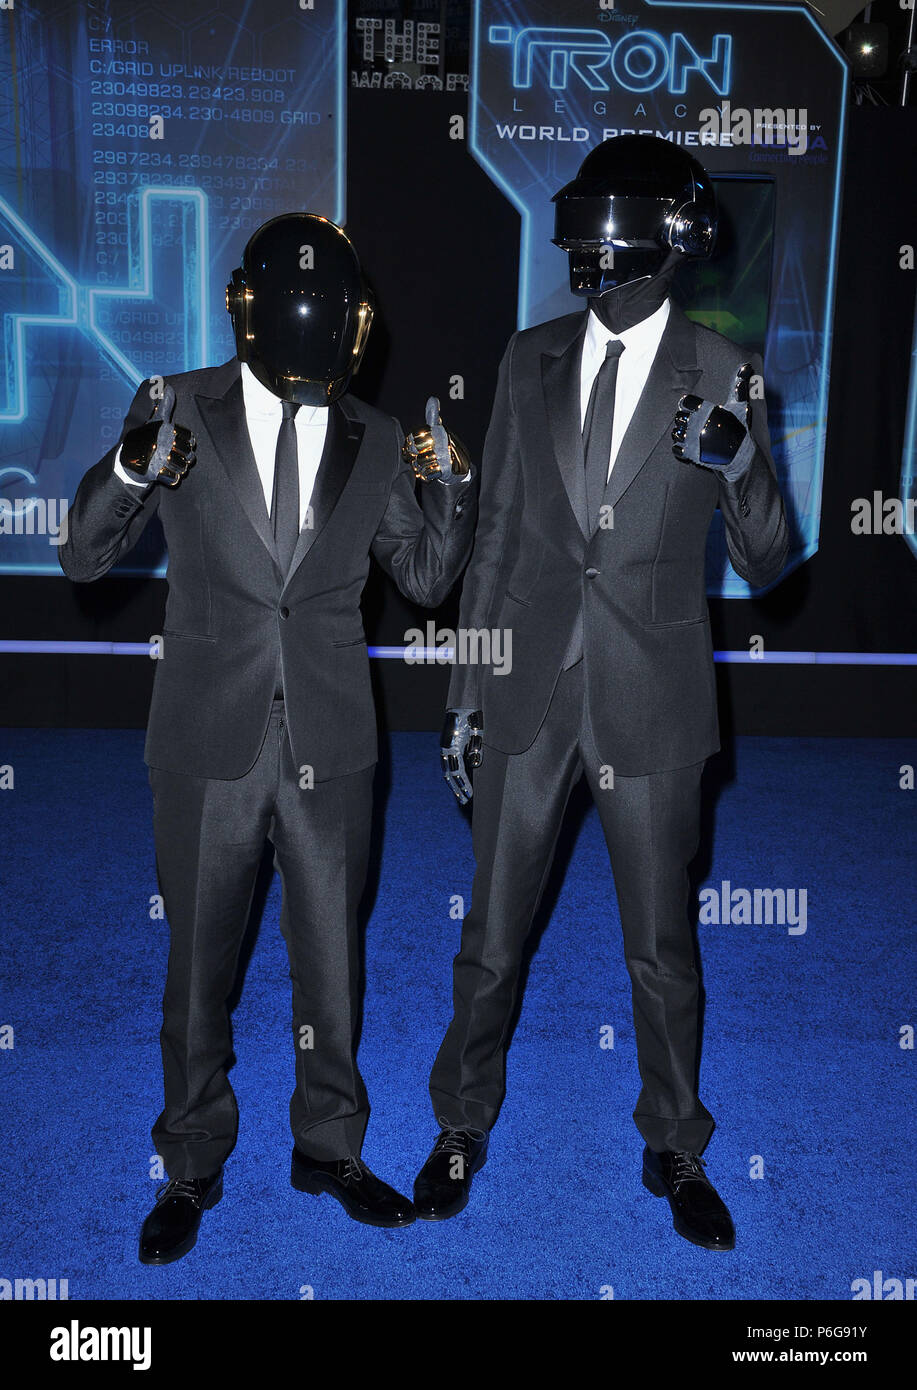 Daft Punk  - Tron: Legacy Premiere at the El Capitan Theatre In Los Angeles.Daft Punk 18  Event in Hollywood Life - California, Red Carpet Event, USA, Film Industry, Celebrities, Photography, Bestof, Arts Culture and Entertainment, Topix Celebrities fashion, Best of, Hollywood Life, Event in Hollywood Life - California, Red Carpet and backstage, ,Arts Culture and Entertainment, Photography,    inquiry tsuni@Gamma-USA.com ,  Music celebrities, Musician, Music Group, 2010 Stock Photo